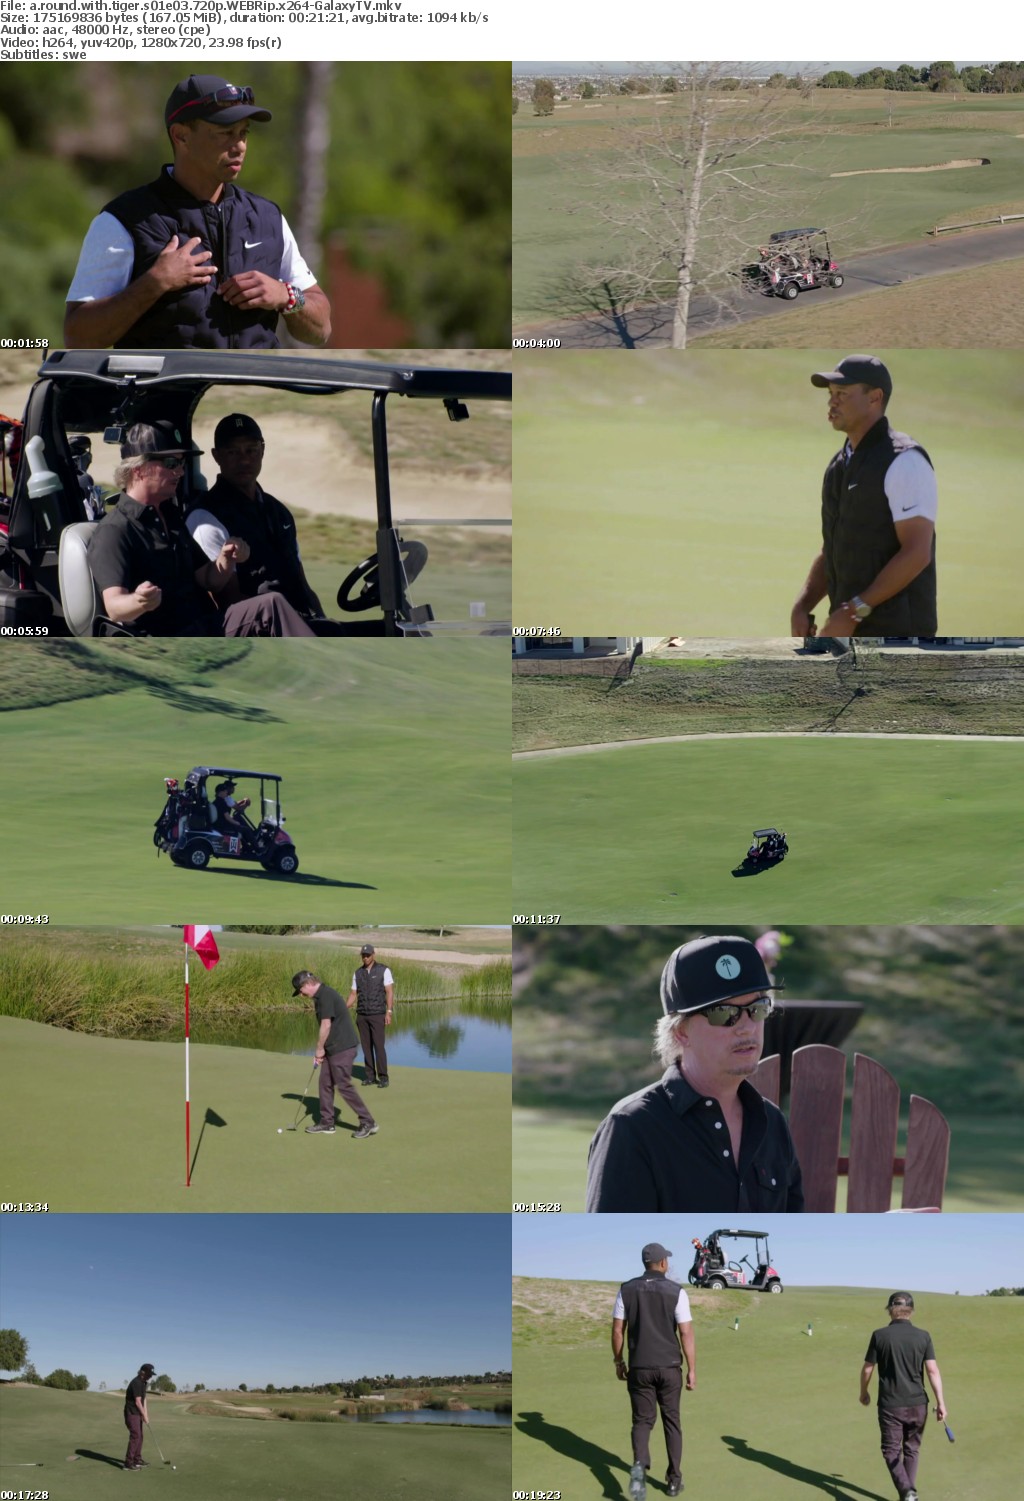 A Round With Tiger S01 COMPLETE 720p WEBRip x264-GalaxyTV